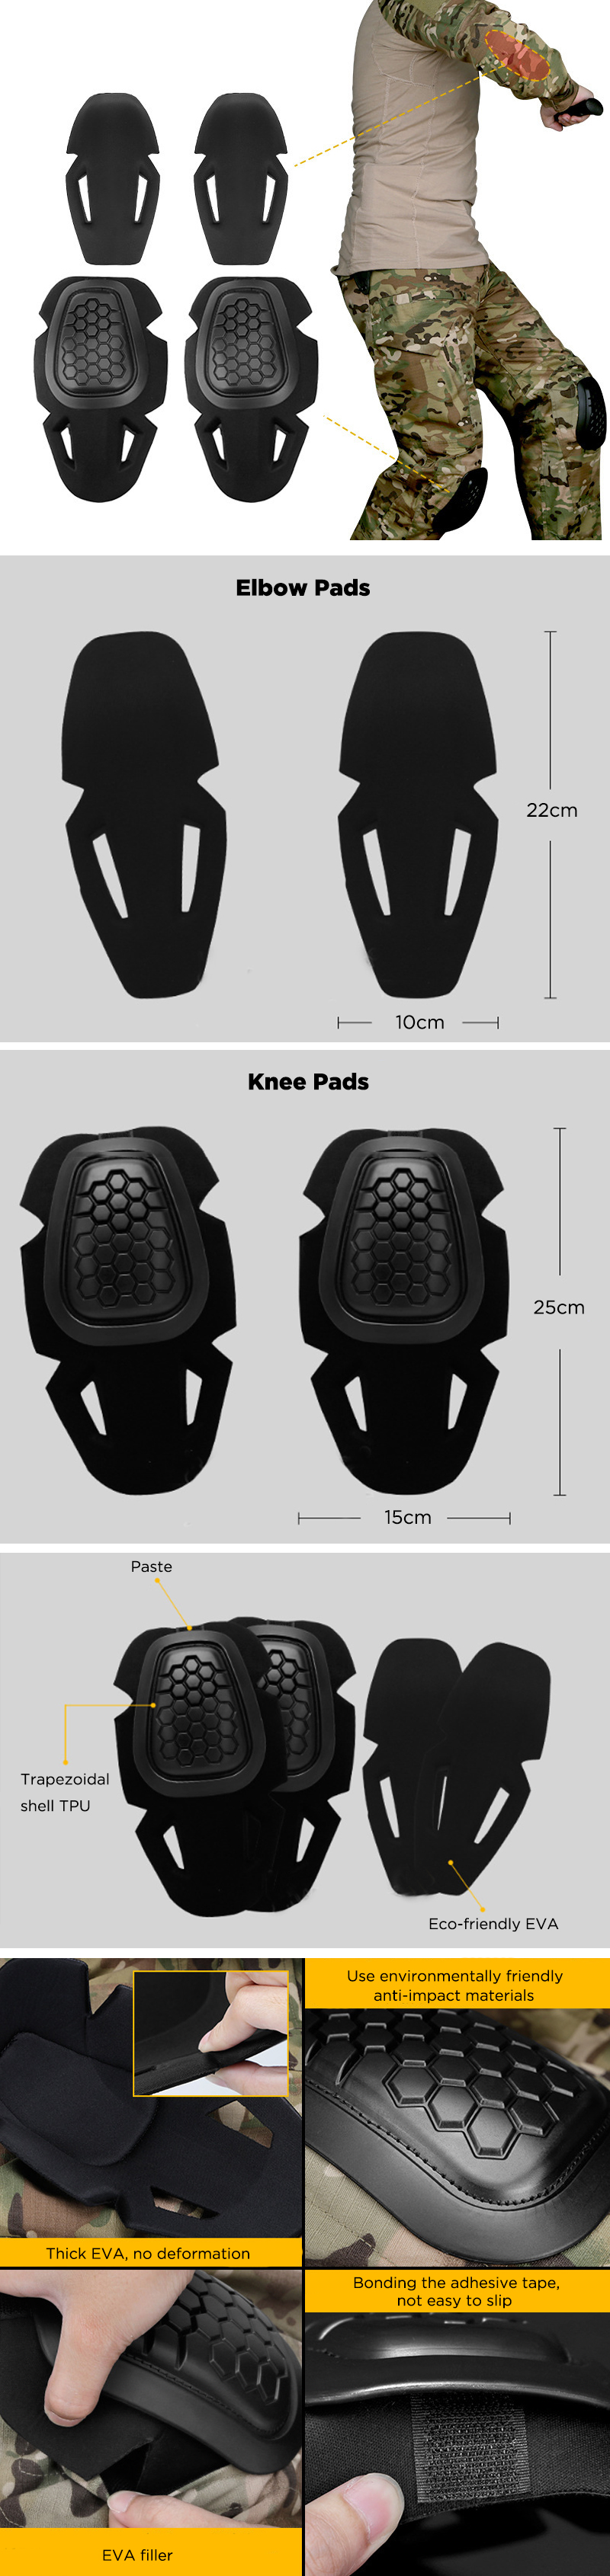 WoSporT-G4-Elbow-Knee-Pads-Non-slip-Impact-Resistant-Outdoor-Hunting-Sports-Protective-Safety-Gear-1616818-1